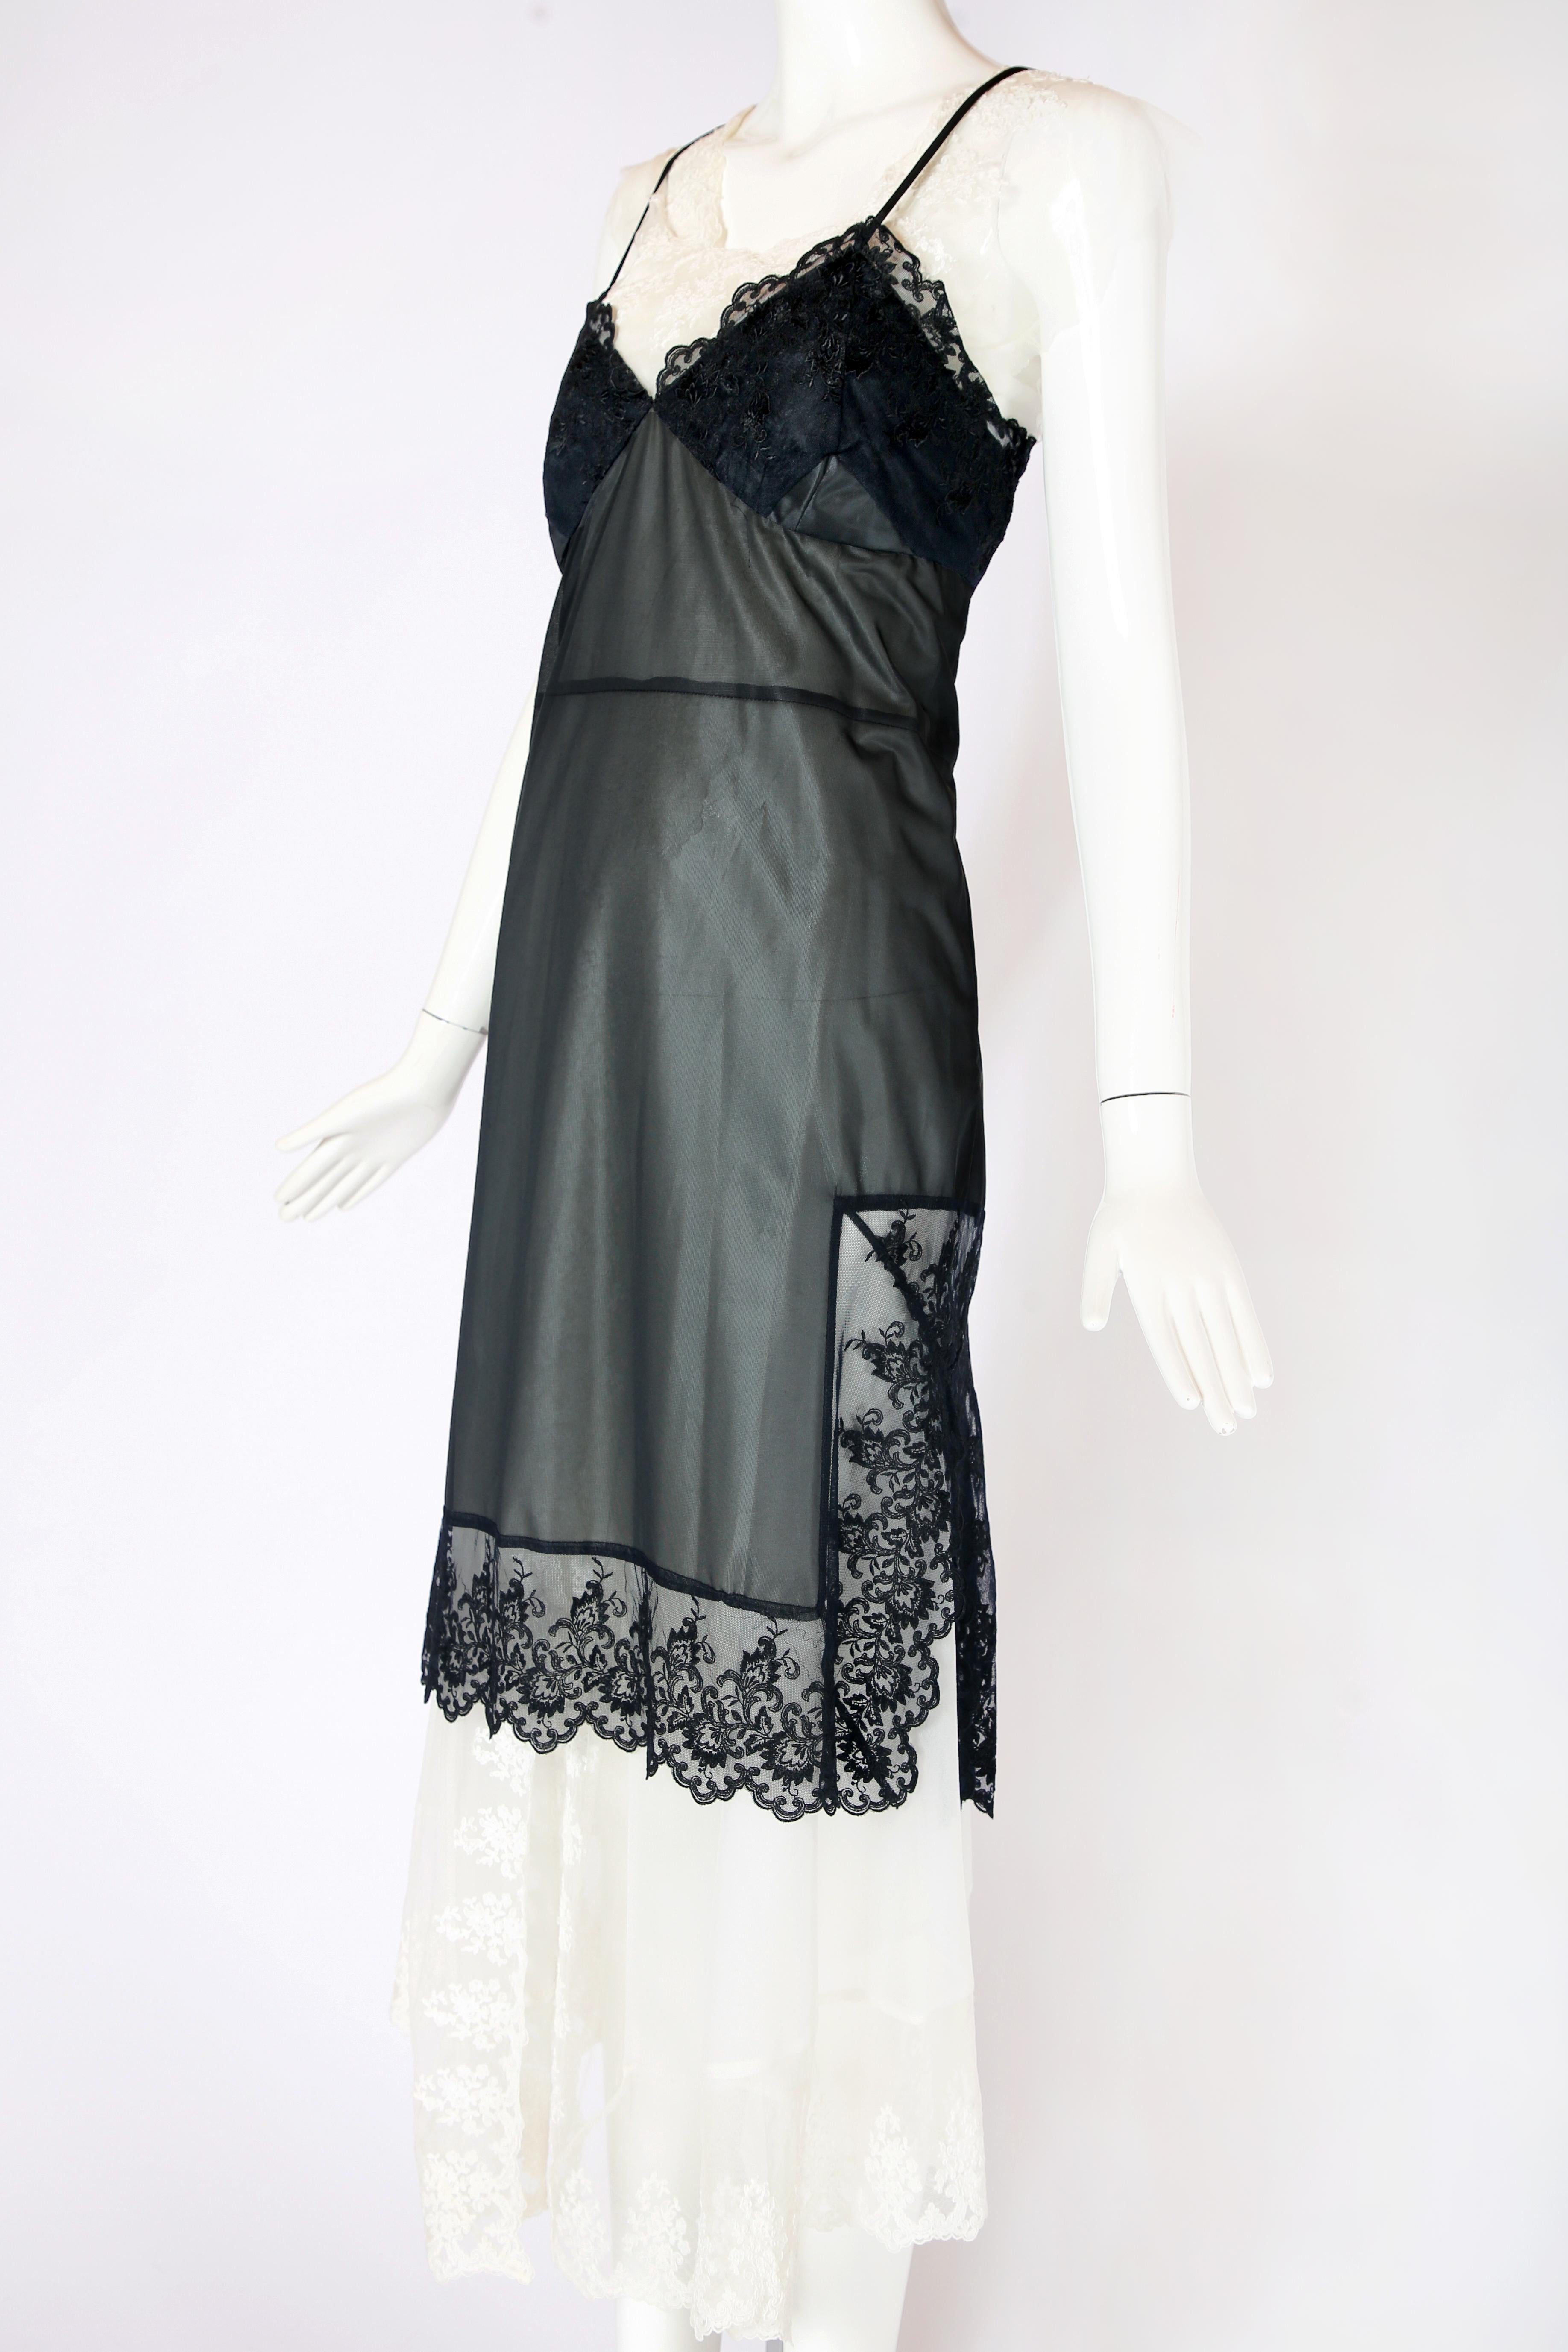 2001 Comme des Garçons double layered black and white slip dress with lace trim. Size M, 100% polyester, Made in Japan. In excellent condition.

Bust: 32